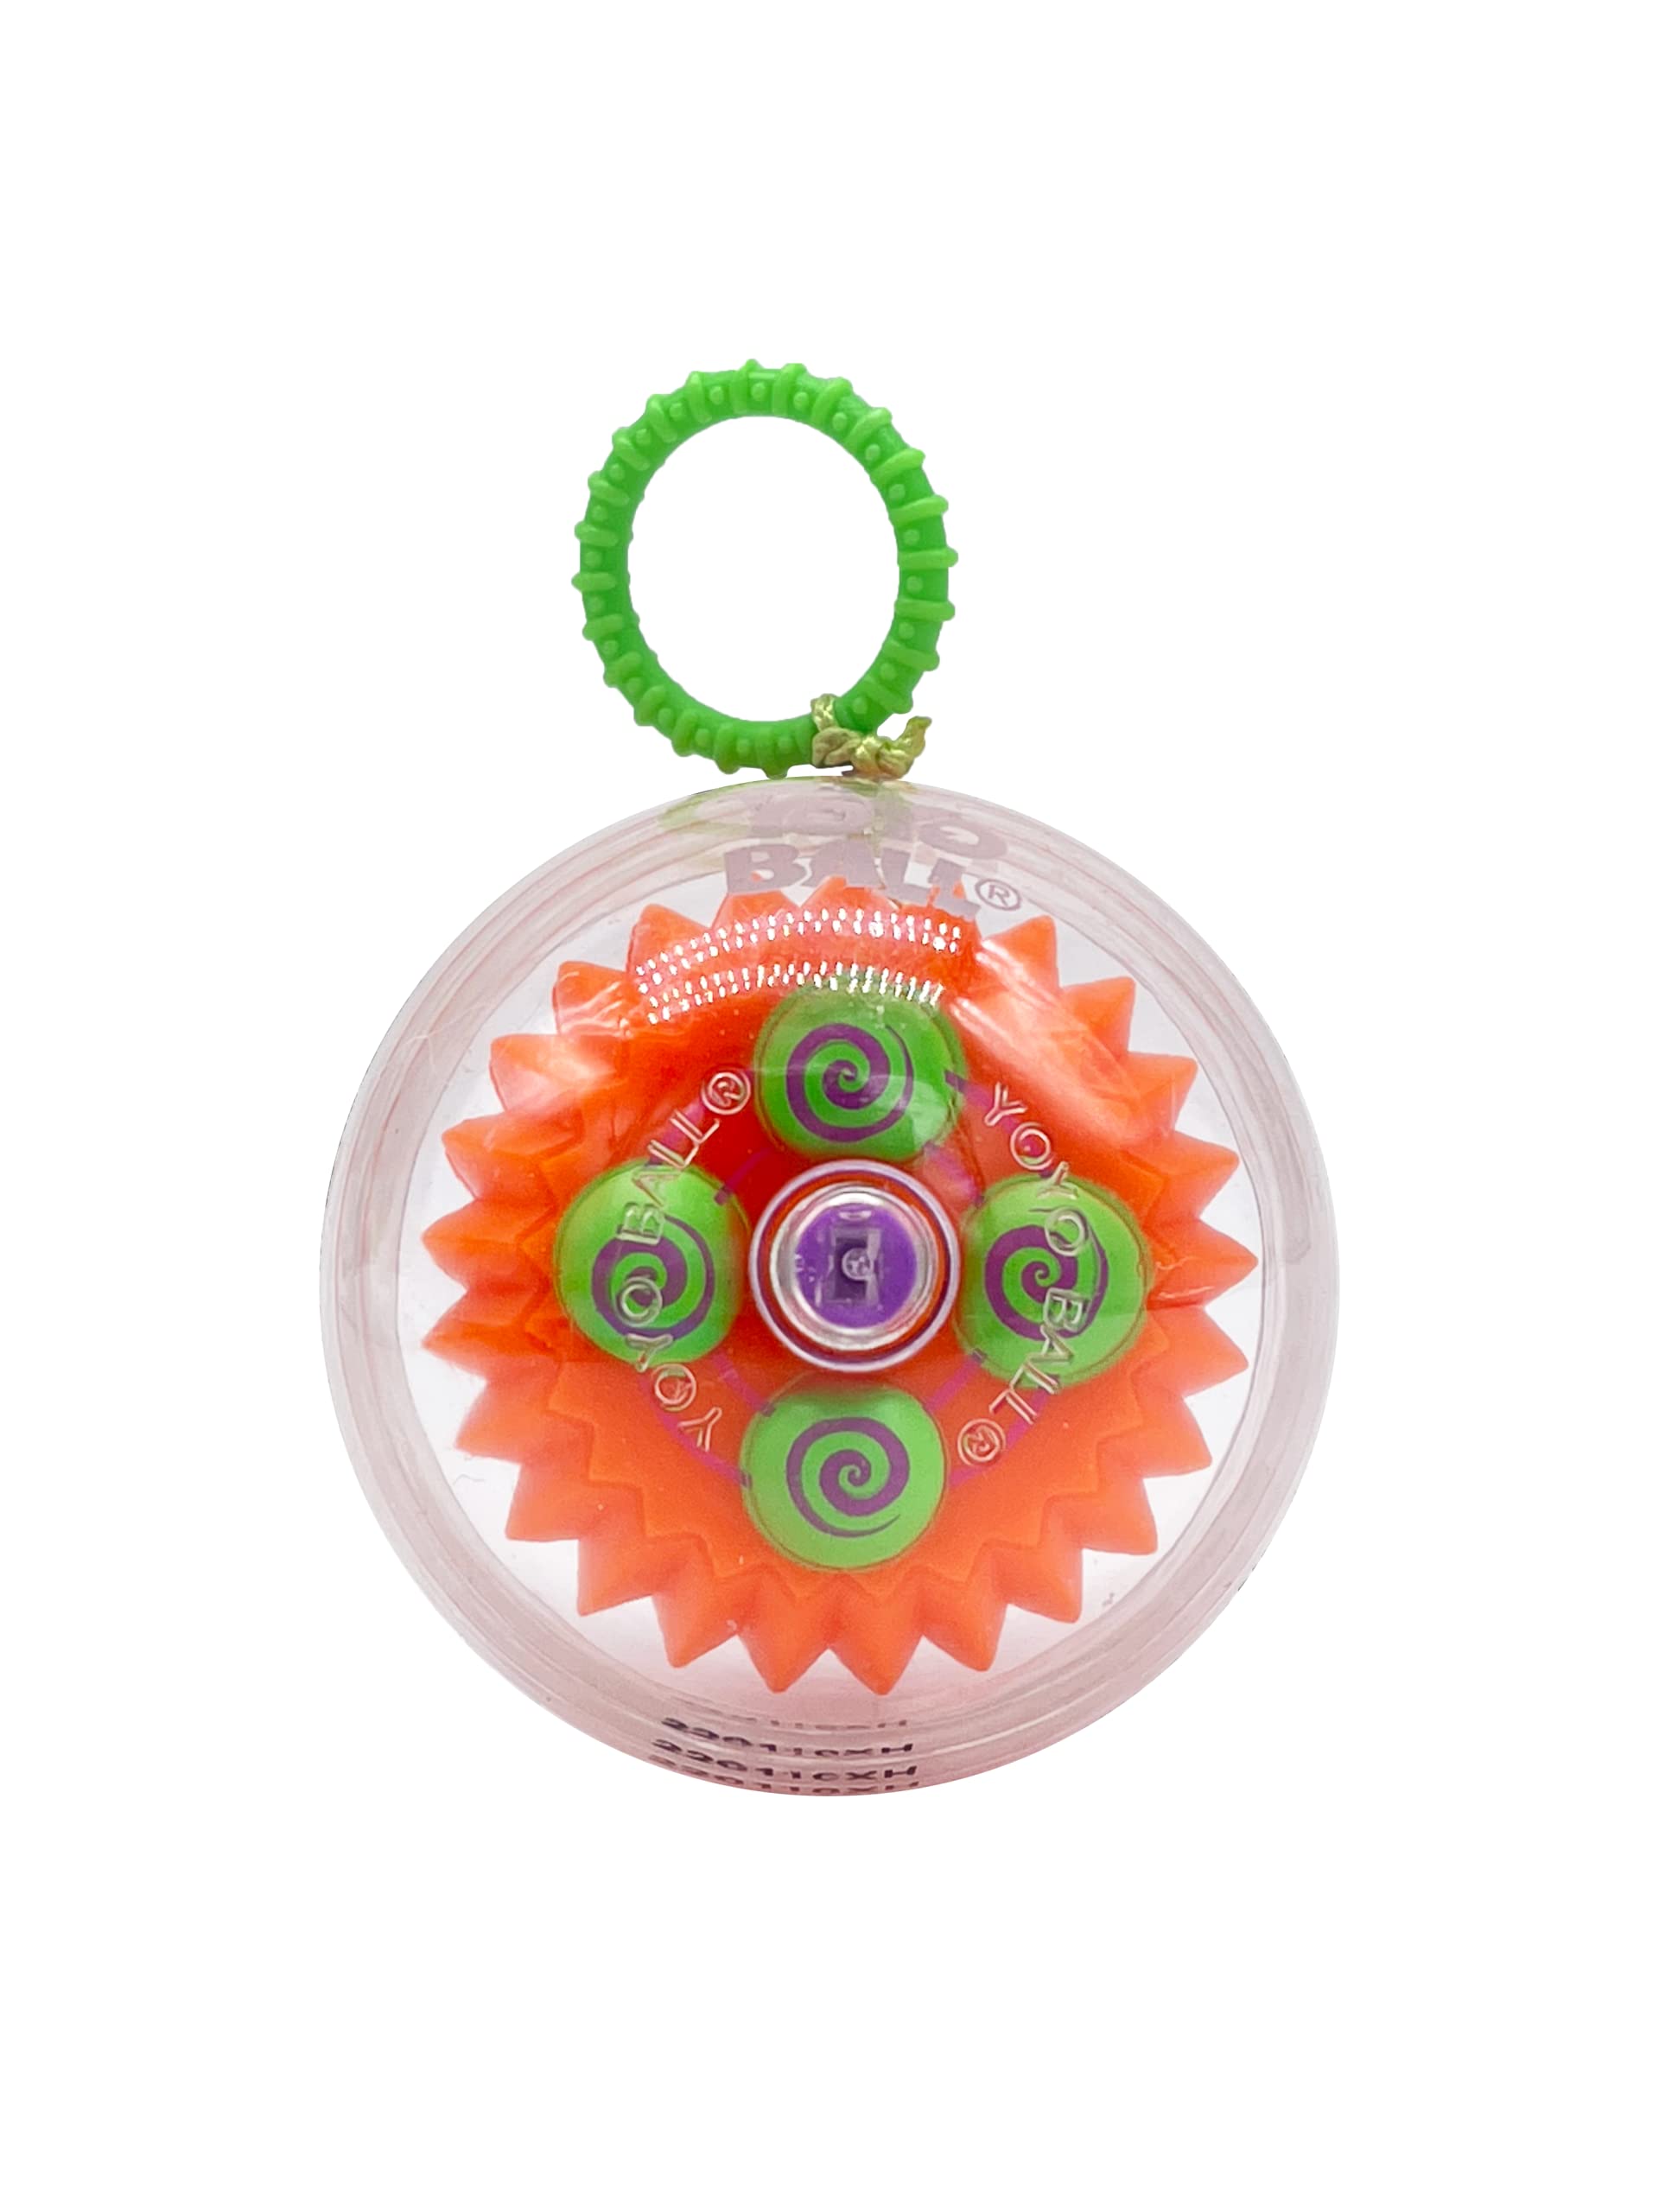 YoYo Ball Party Pack of 5, As seen on TV, Assorted Colors and Patterns, Automatically Returns to You - Never Needs rewinding, Instructions Included - Learn to Create Tricks